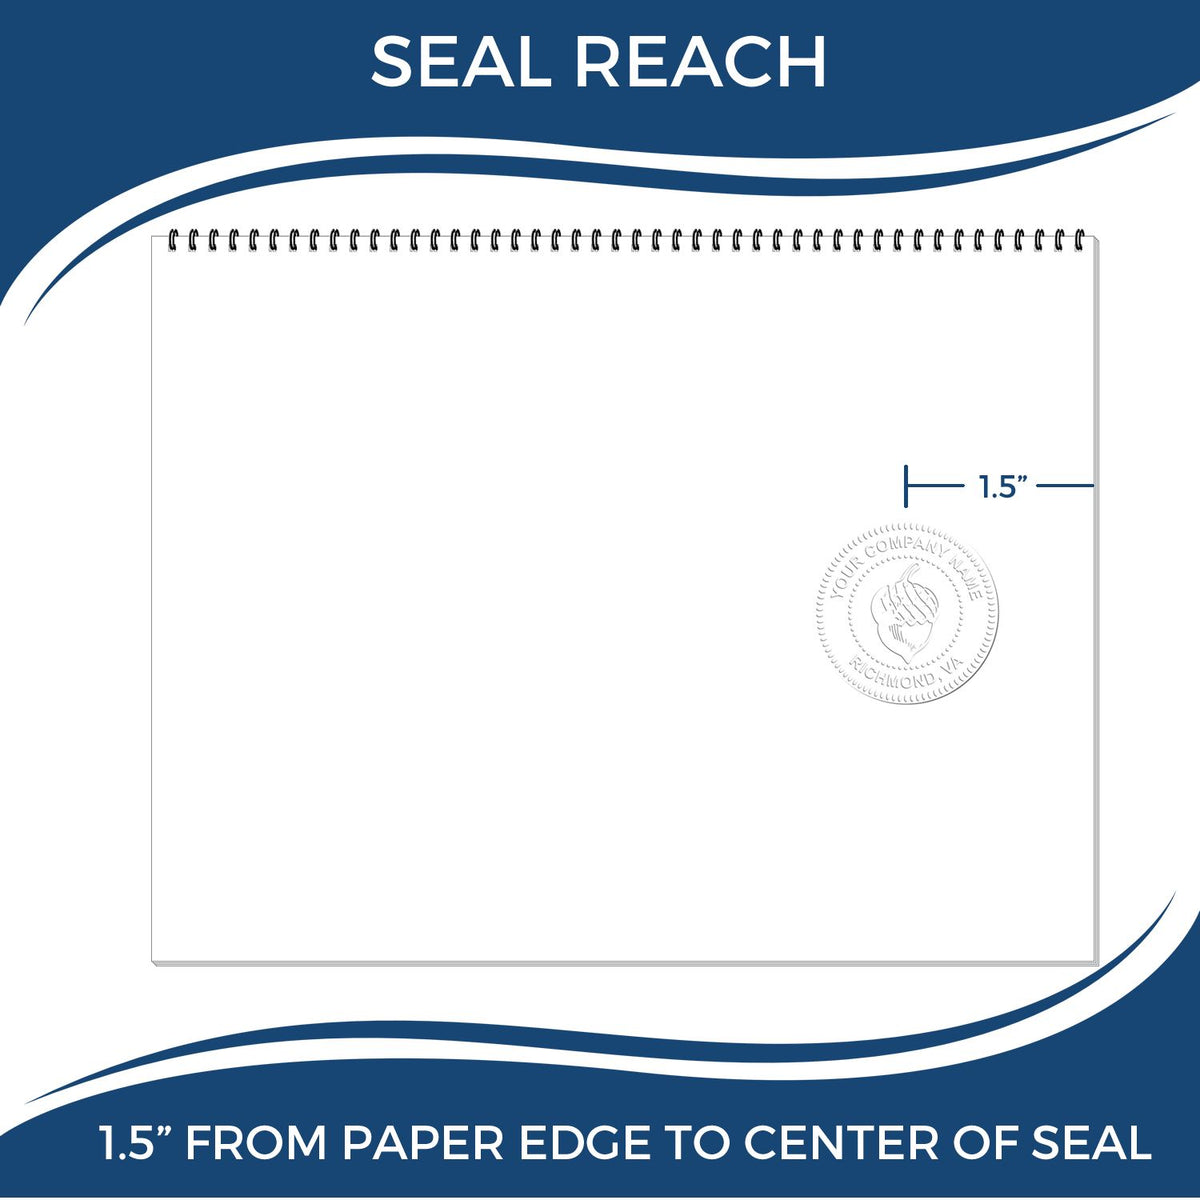 An infographic showing the seal reach which is represented by a ruler and a miniature seal image of the Hybrid Utah Landscape Architect Seal